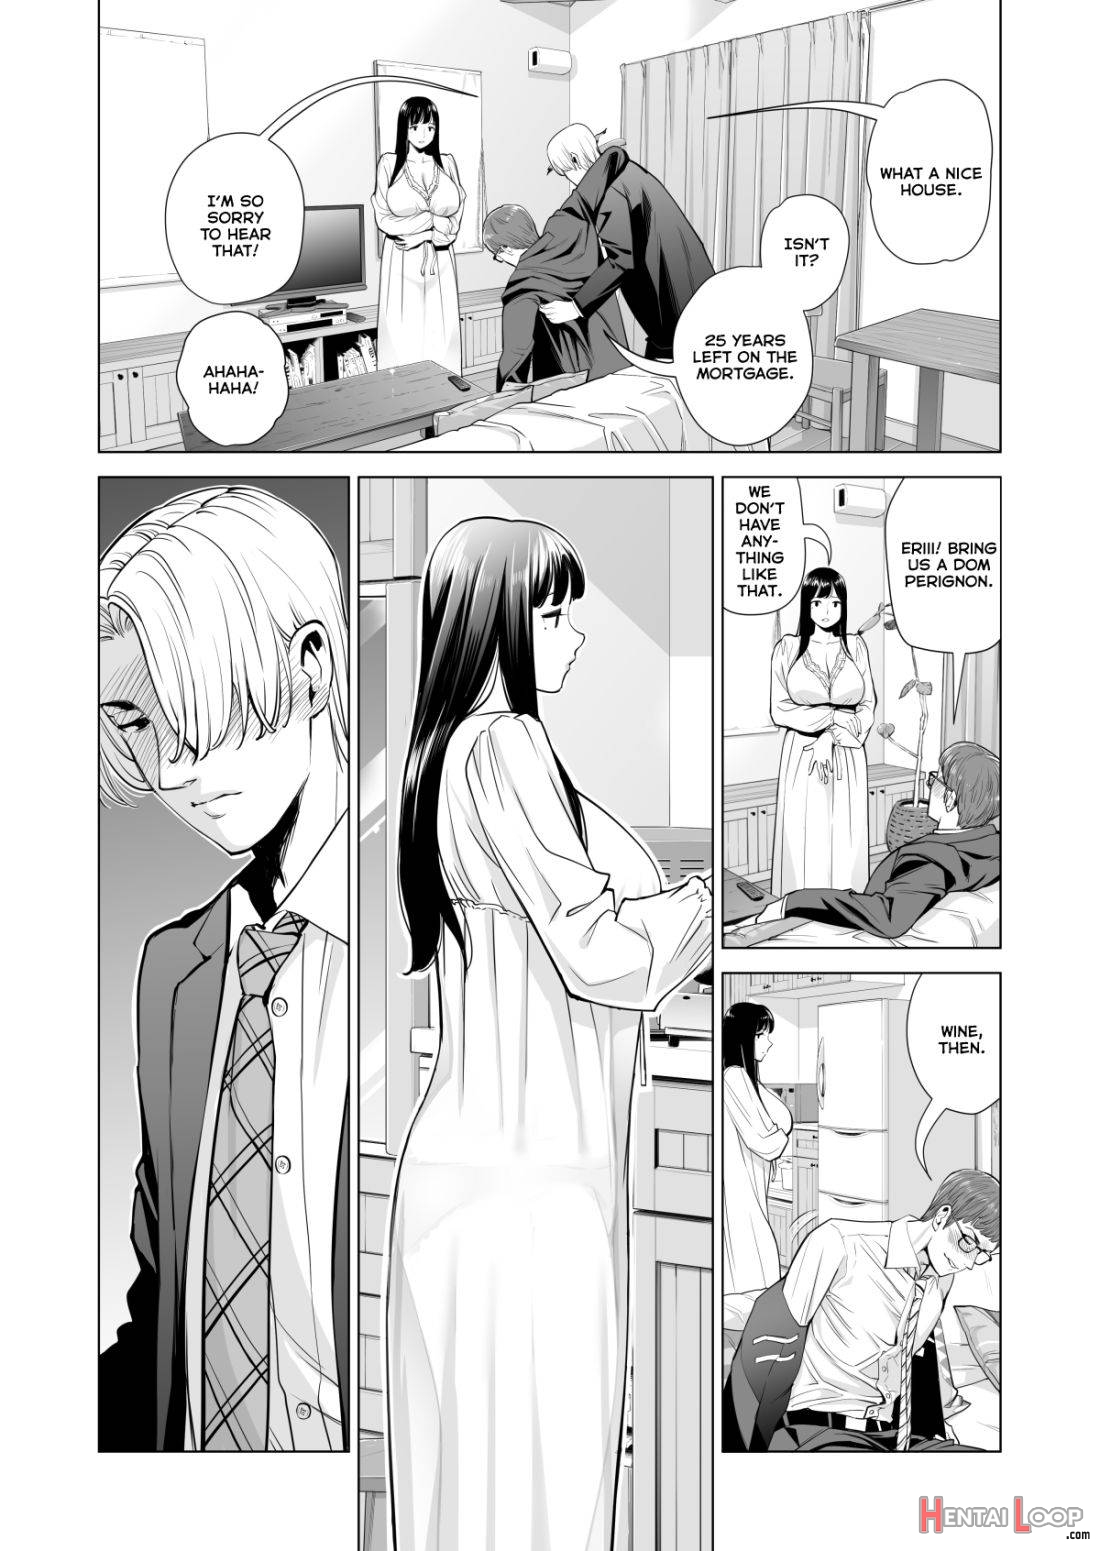 Tsukiyo no Midare Zake (Zenpen) Moonlit Intoxication ~ A Housewife Stolen by a Coworker Besides her Blackout Drunk Husband ~ Chapter 1 page 14